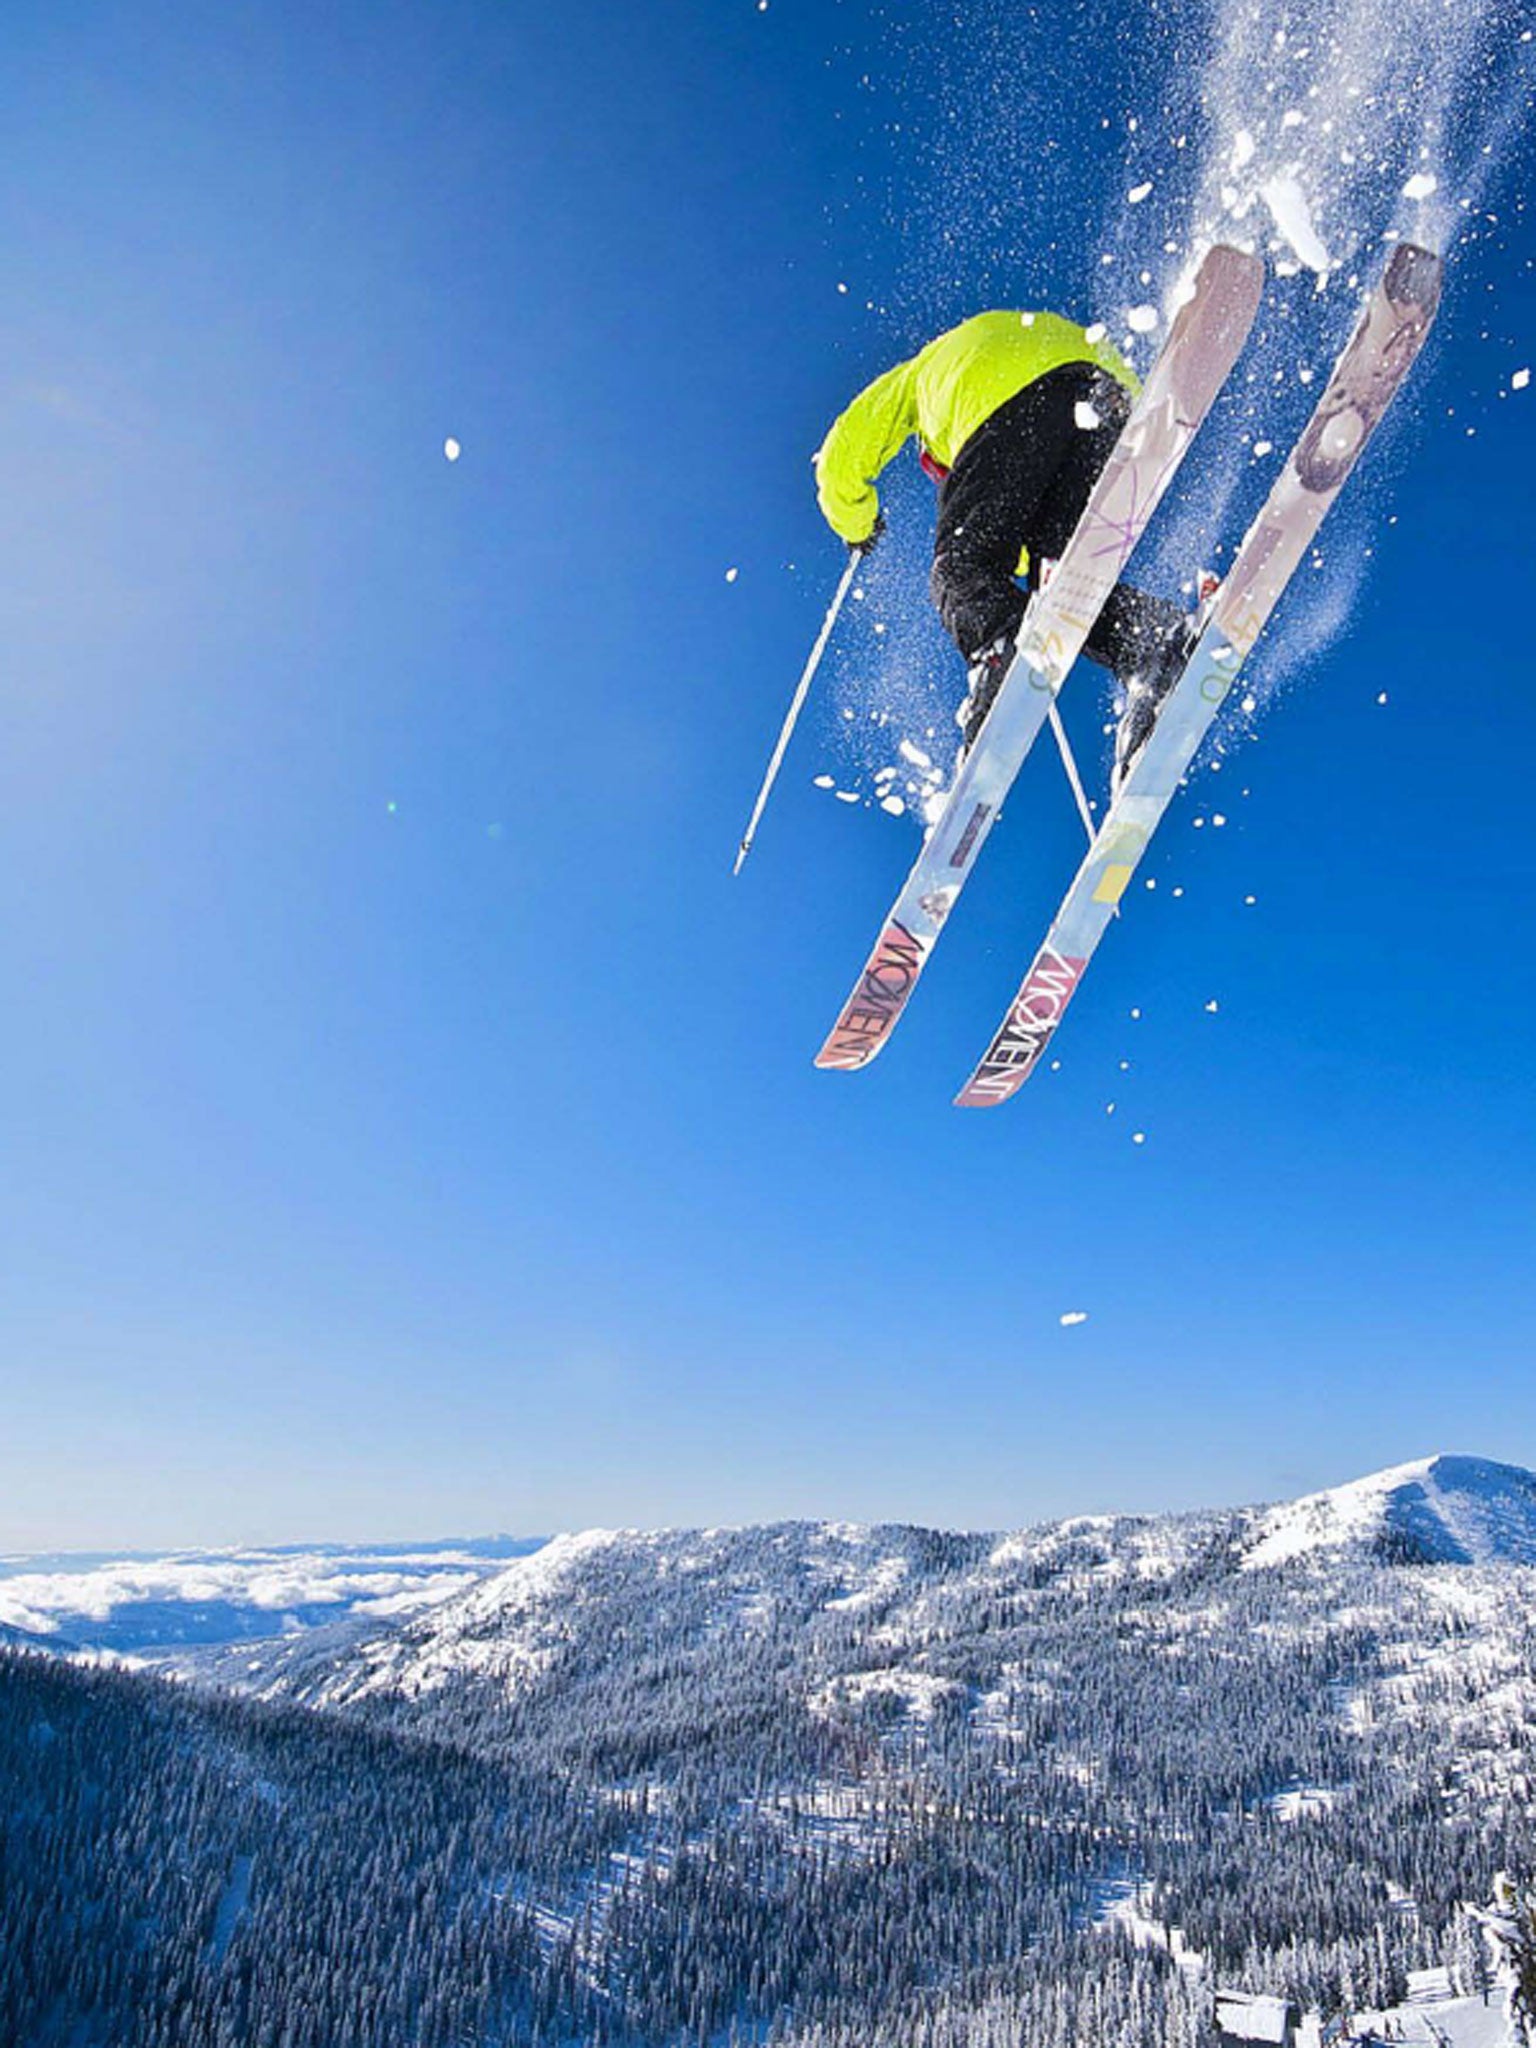 Air time: skiing at the Red Mountain resort